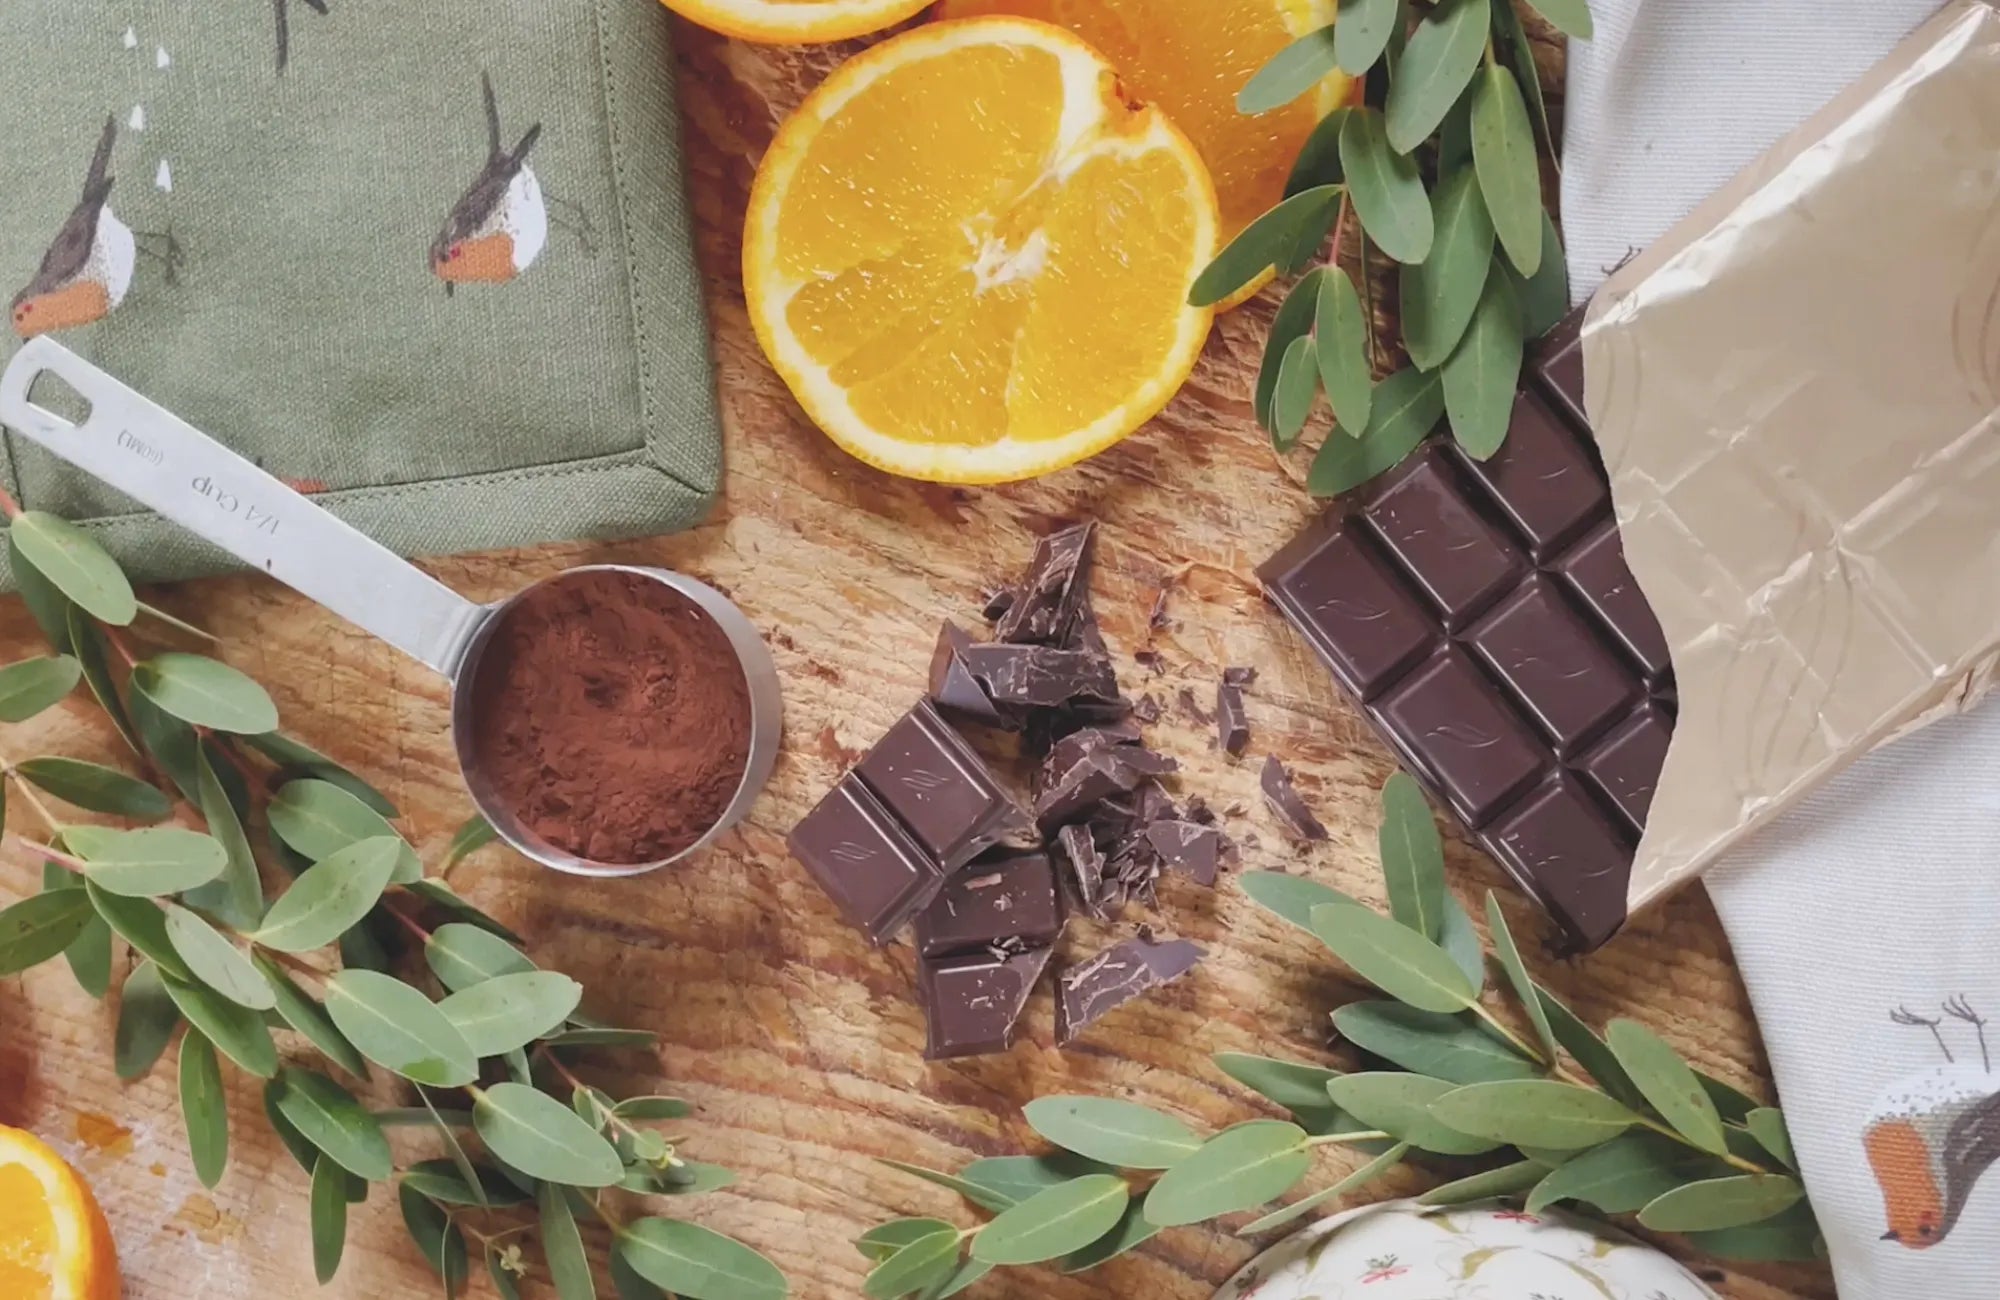 Oranges, chocolate bars, cocoa powder on a work surface